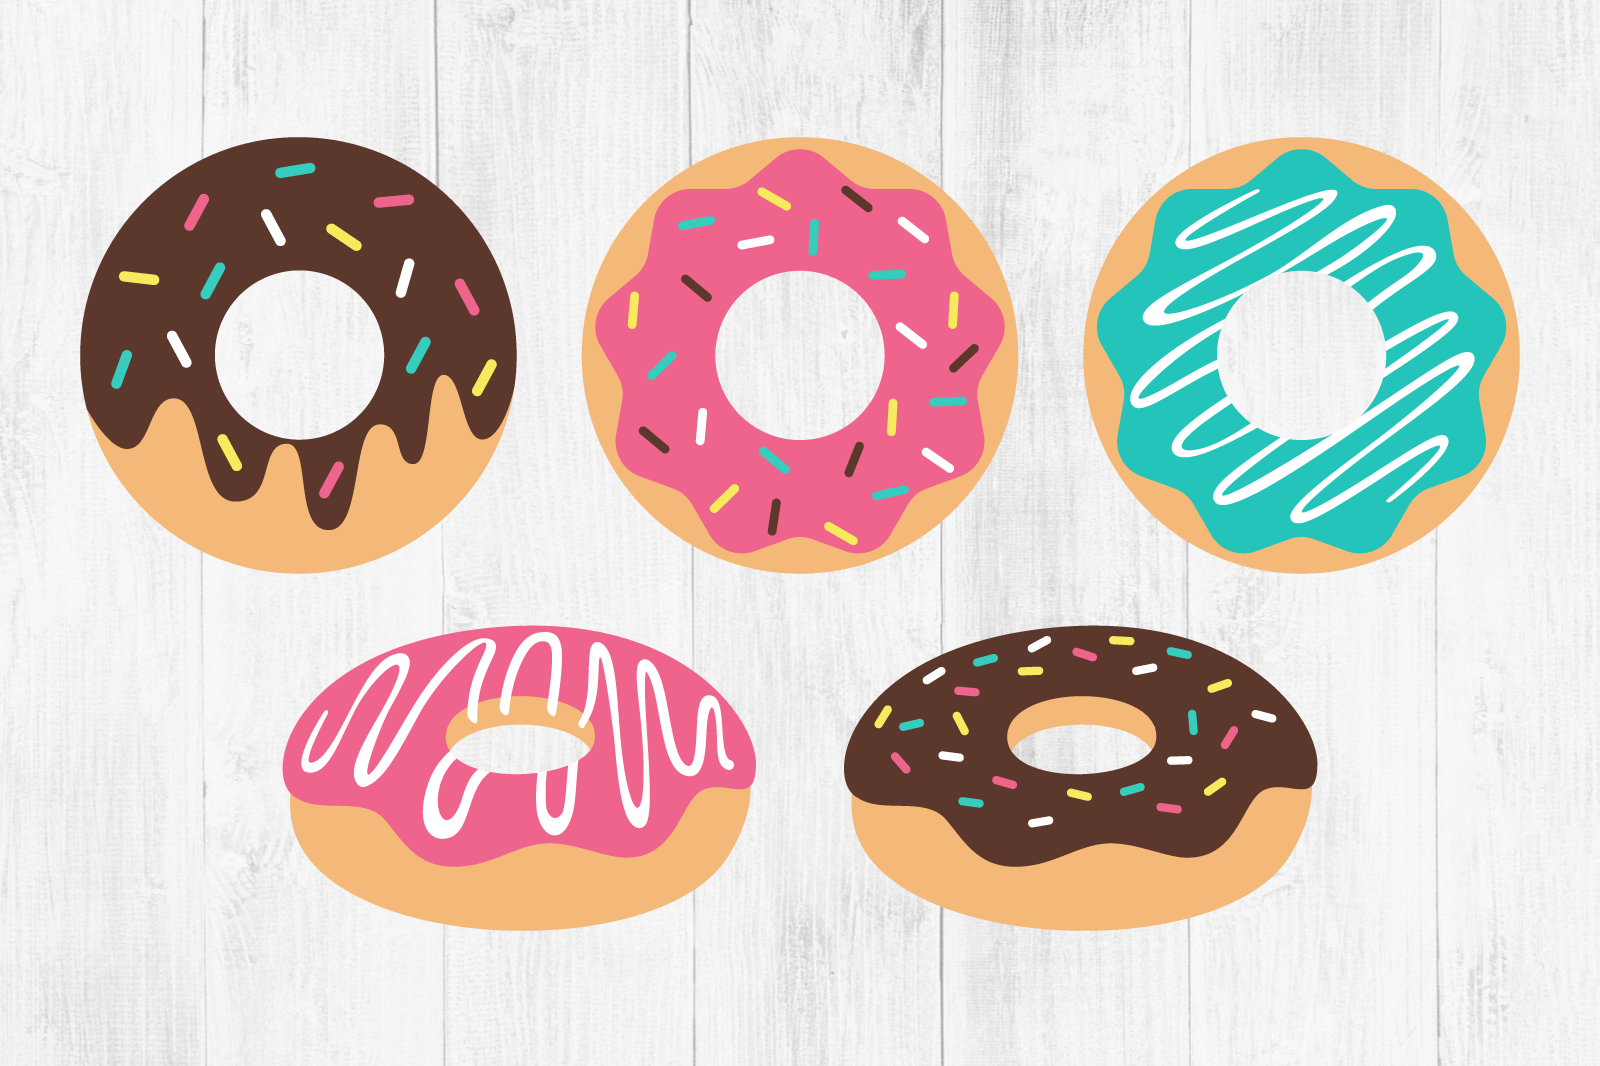 donuts with dad clipart